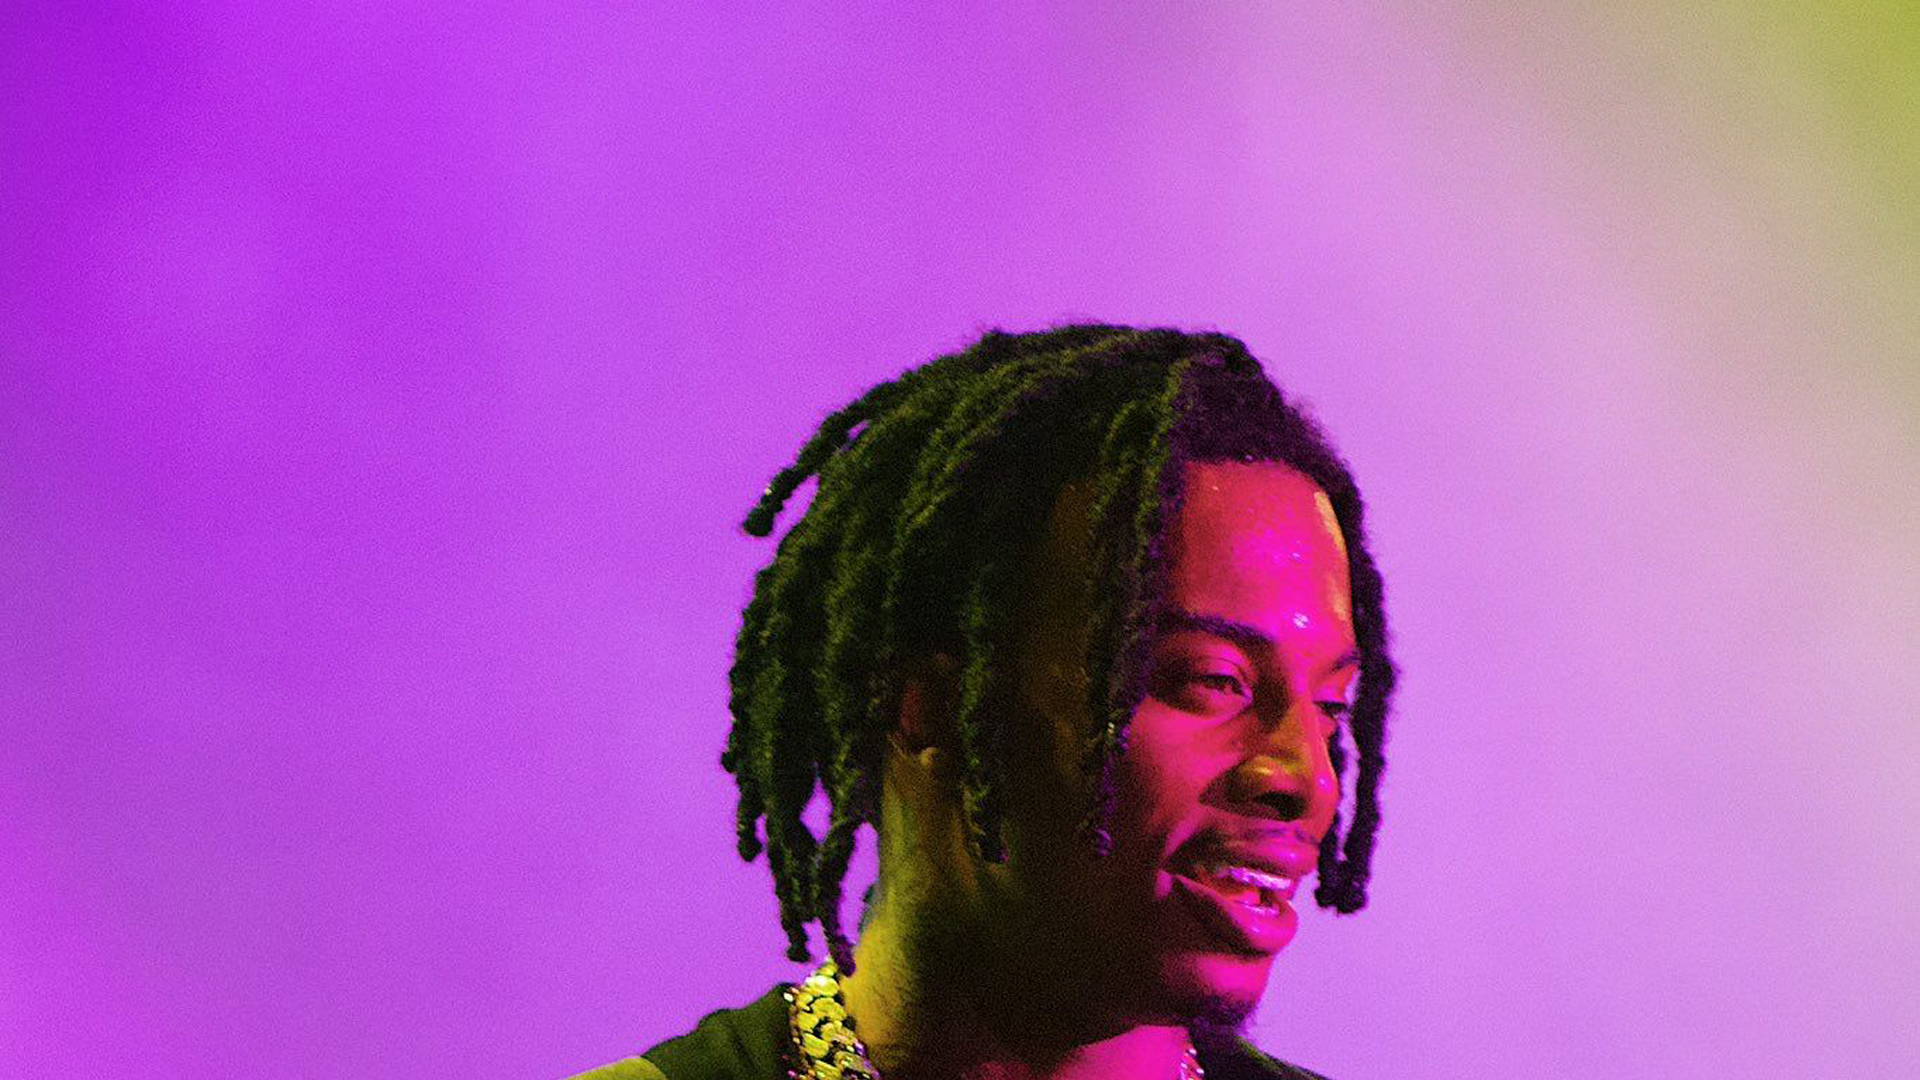 playboi carti in purple background wearing chains on neck HD music Wallpaper